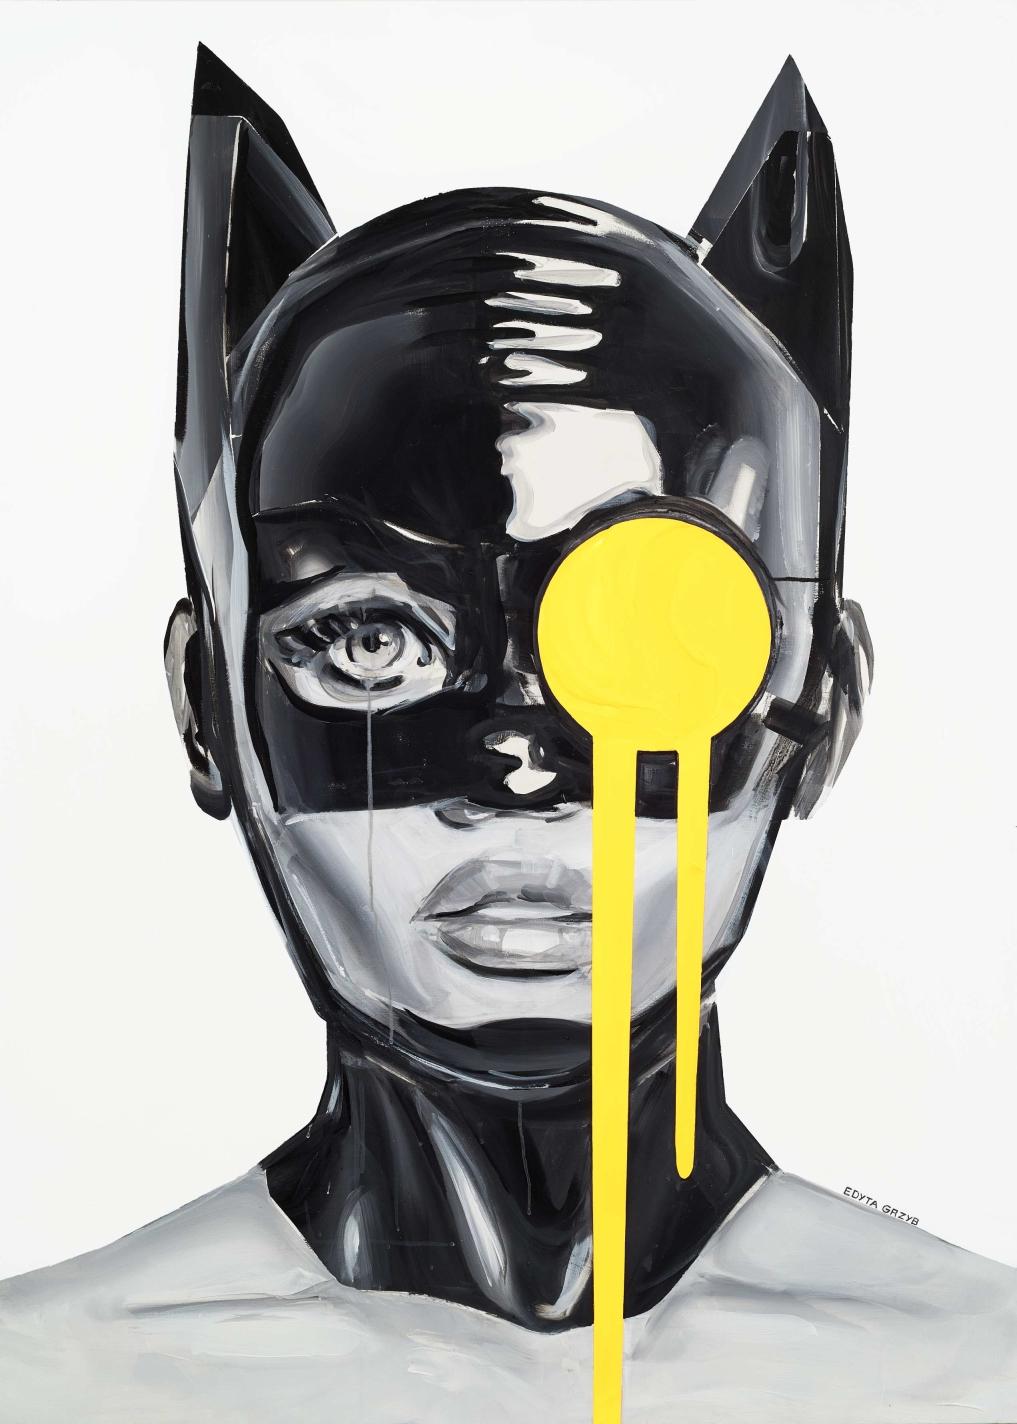 "VINYL BATWOMAN" Plexiglass Print 39' x 28' in Ed. of 50 by Edyta Grzyb

Image form: pigment print behind acrylic glass, glossy, inlaid. On the back with a mounting rail for hanging on the wall.												
On the back of the work there is a